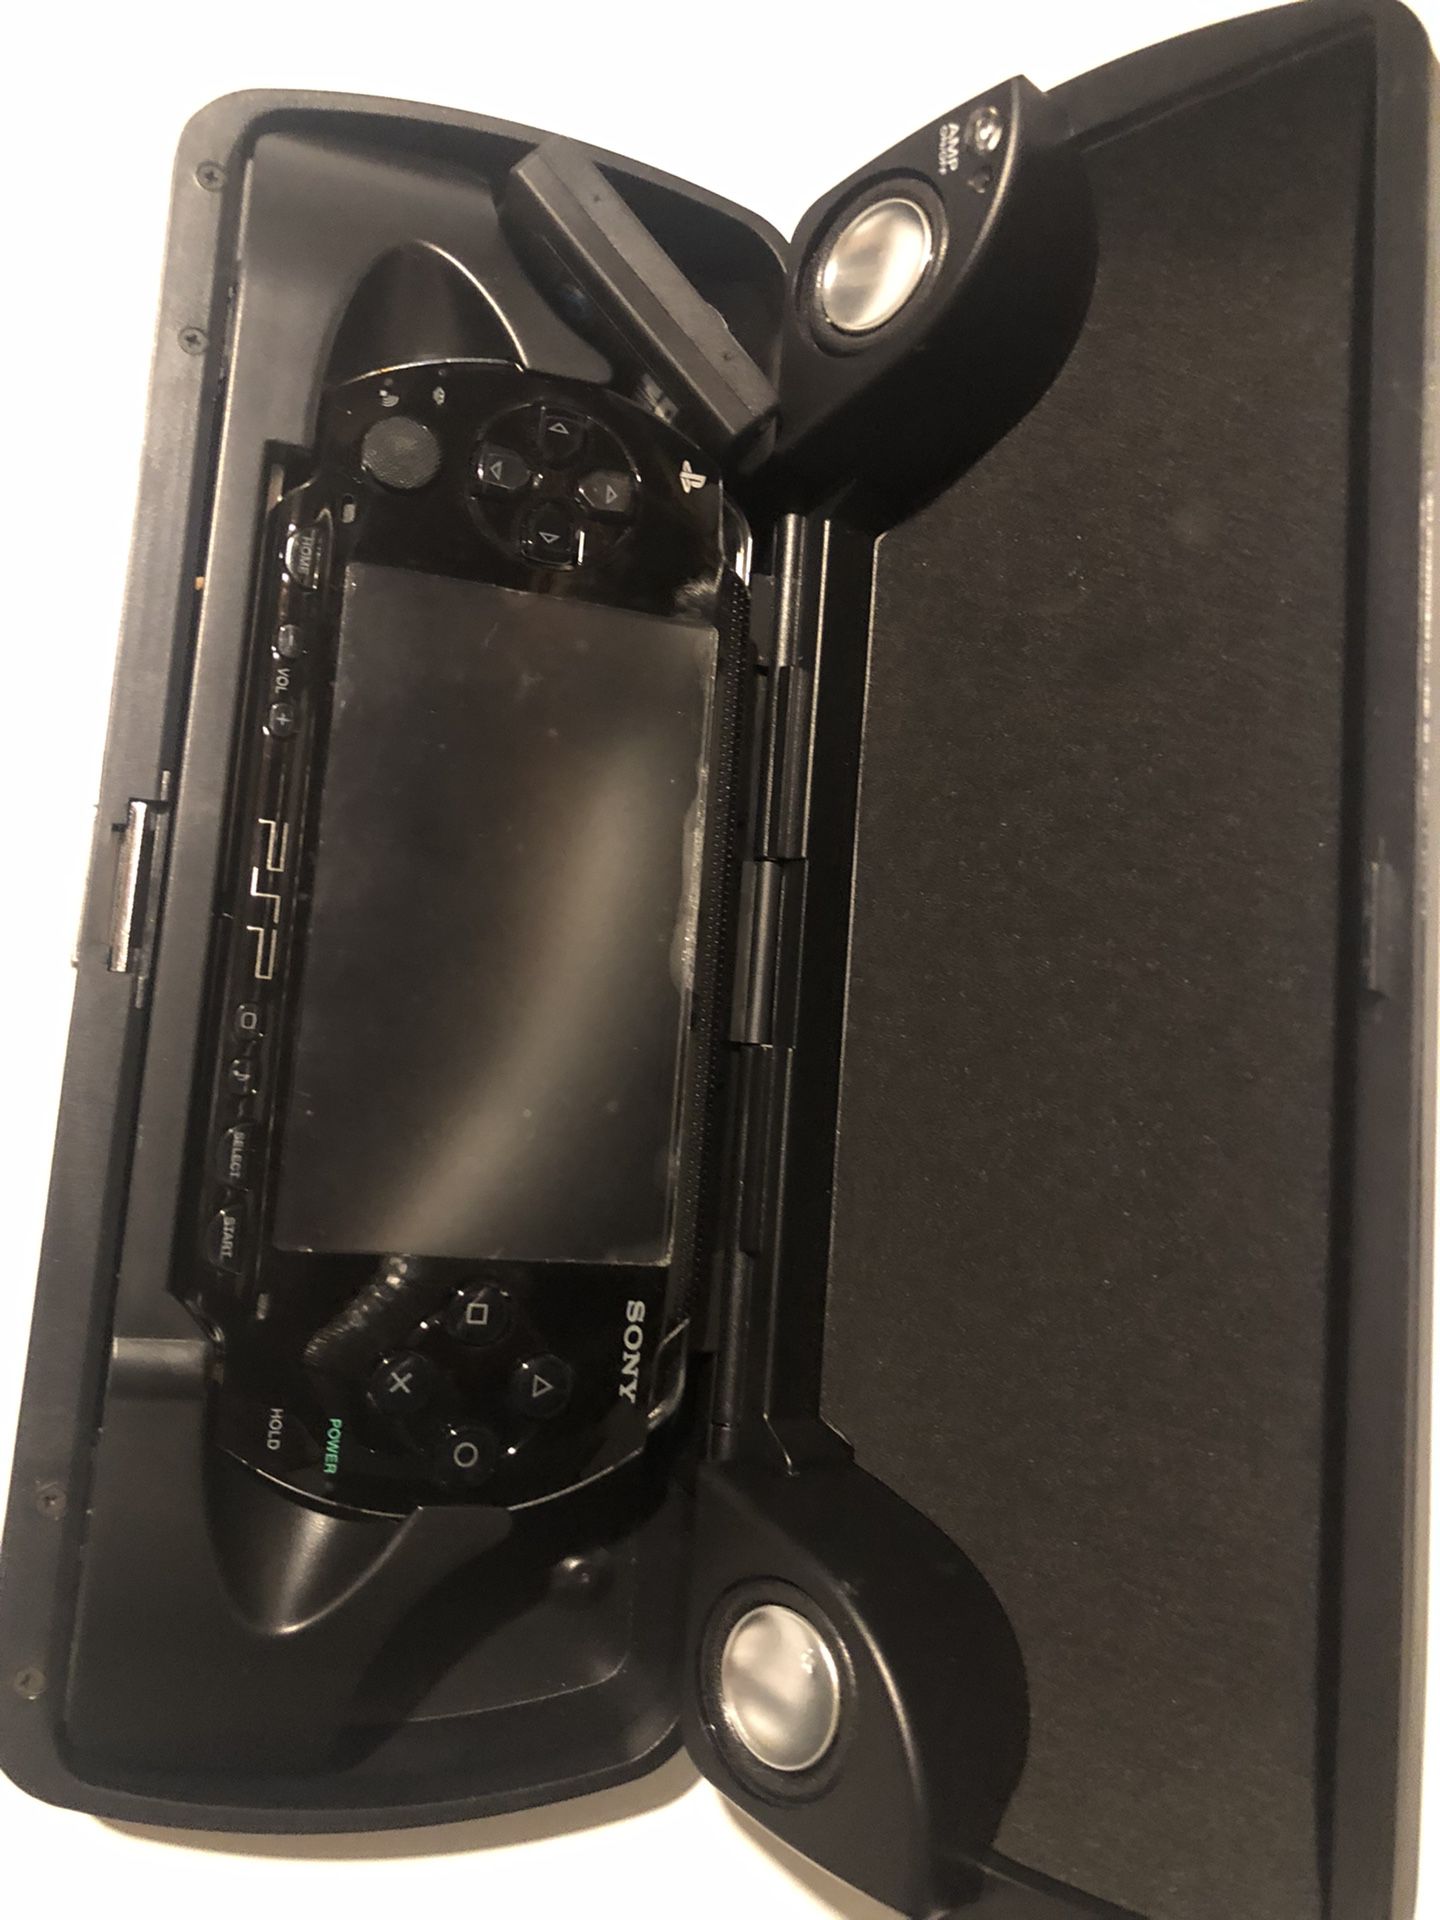 Sony PSP   Needs A Battery And A cord   The It Will Work Fine   Thanks  